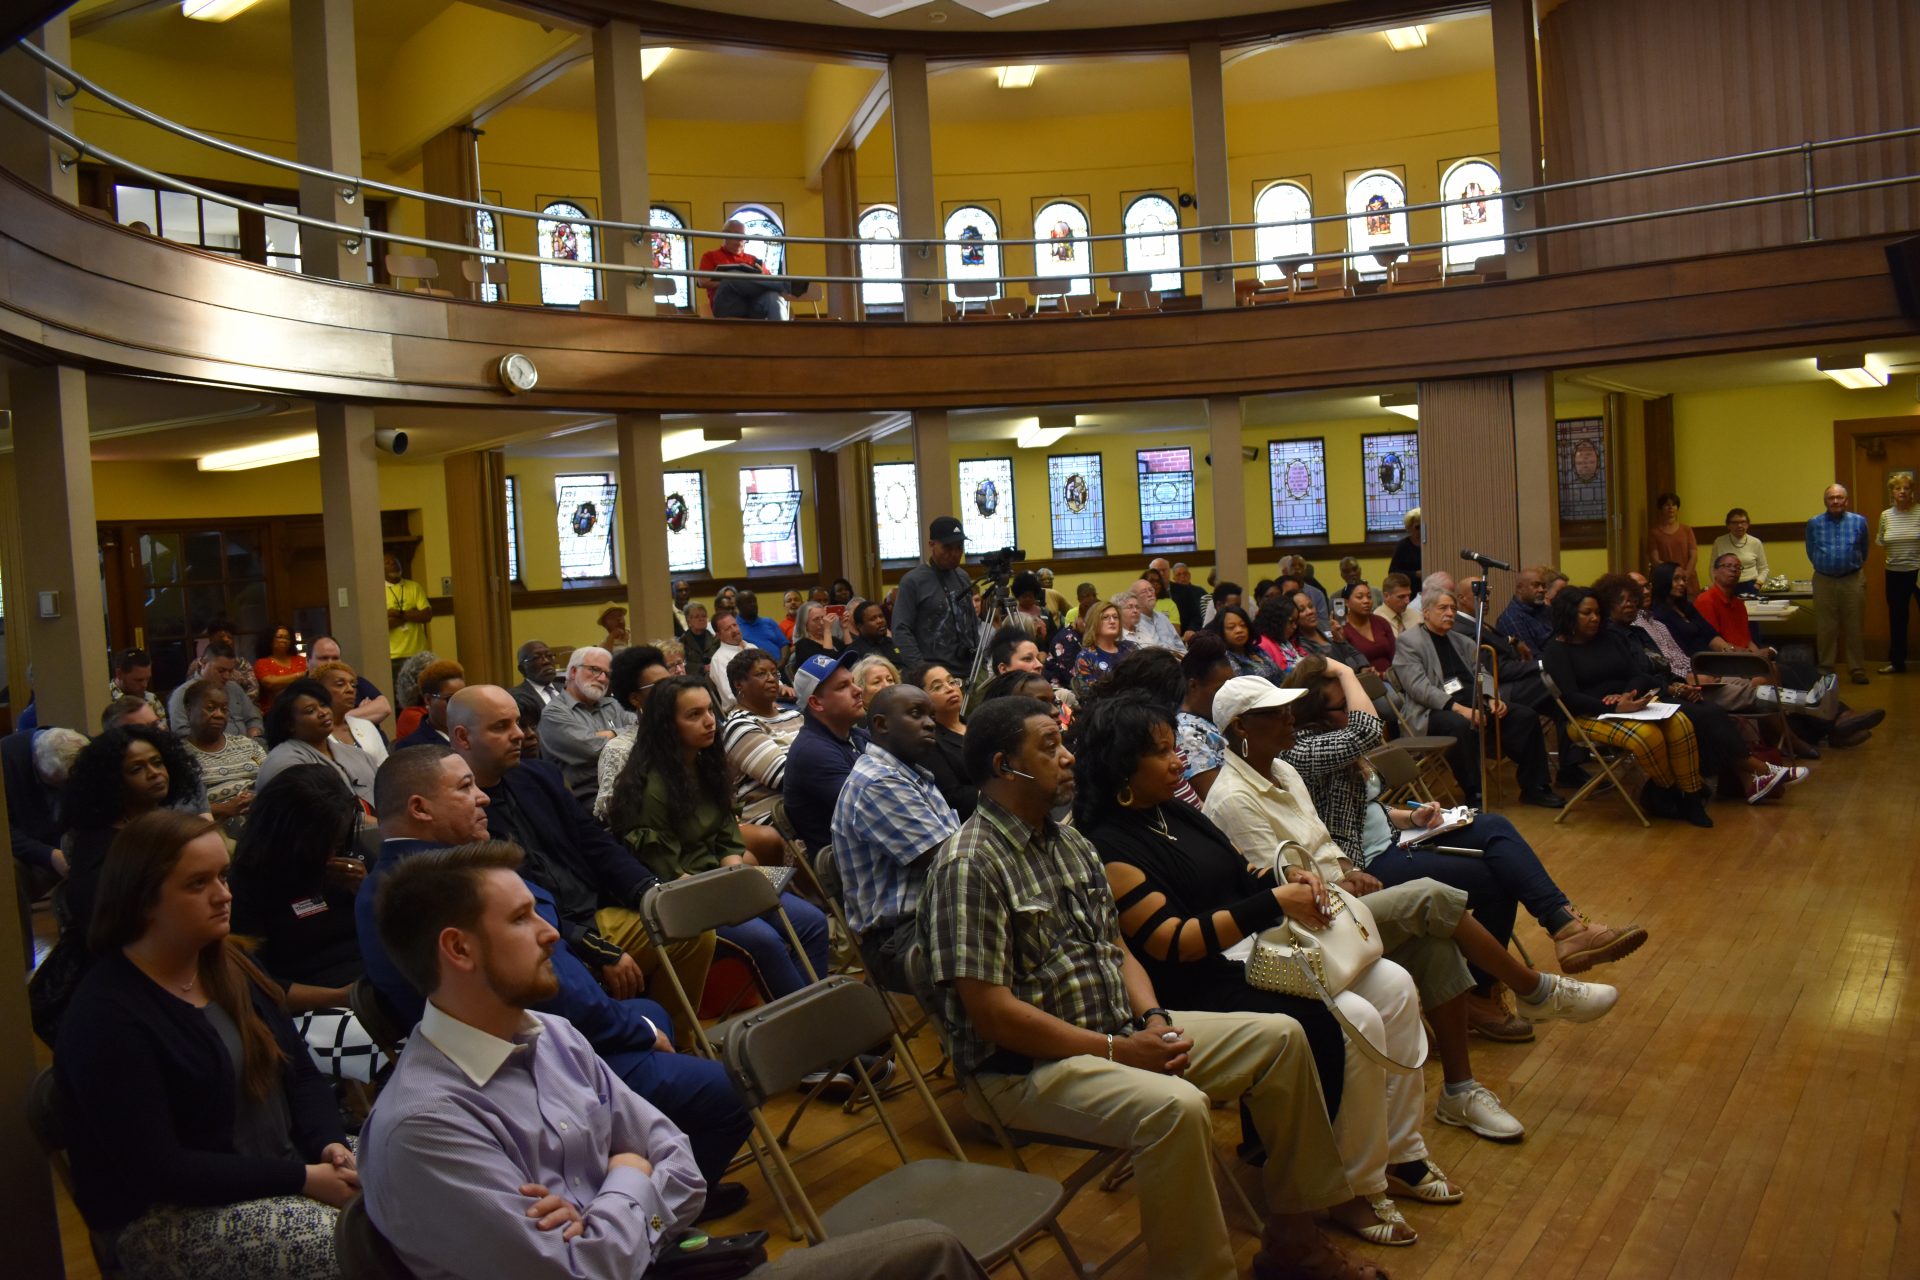 More than 100 people attended a forum on April 9, 2019, at Zion United Church of Christ in York.